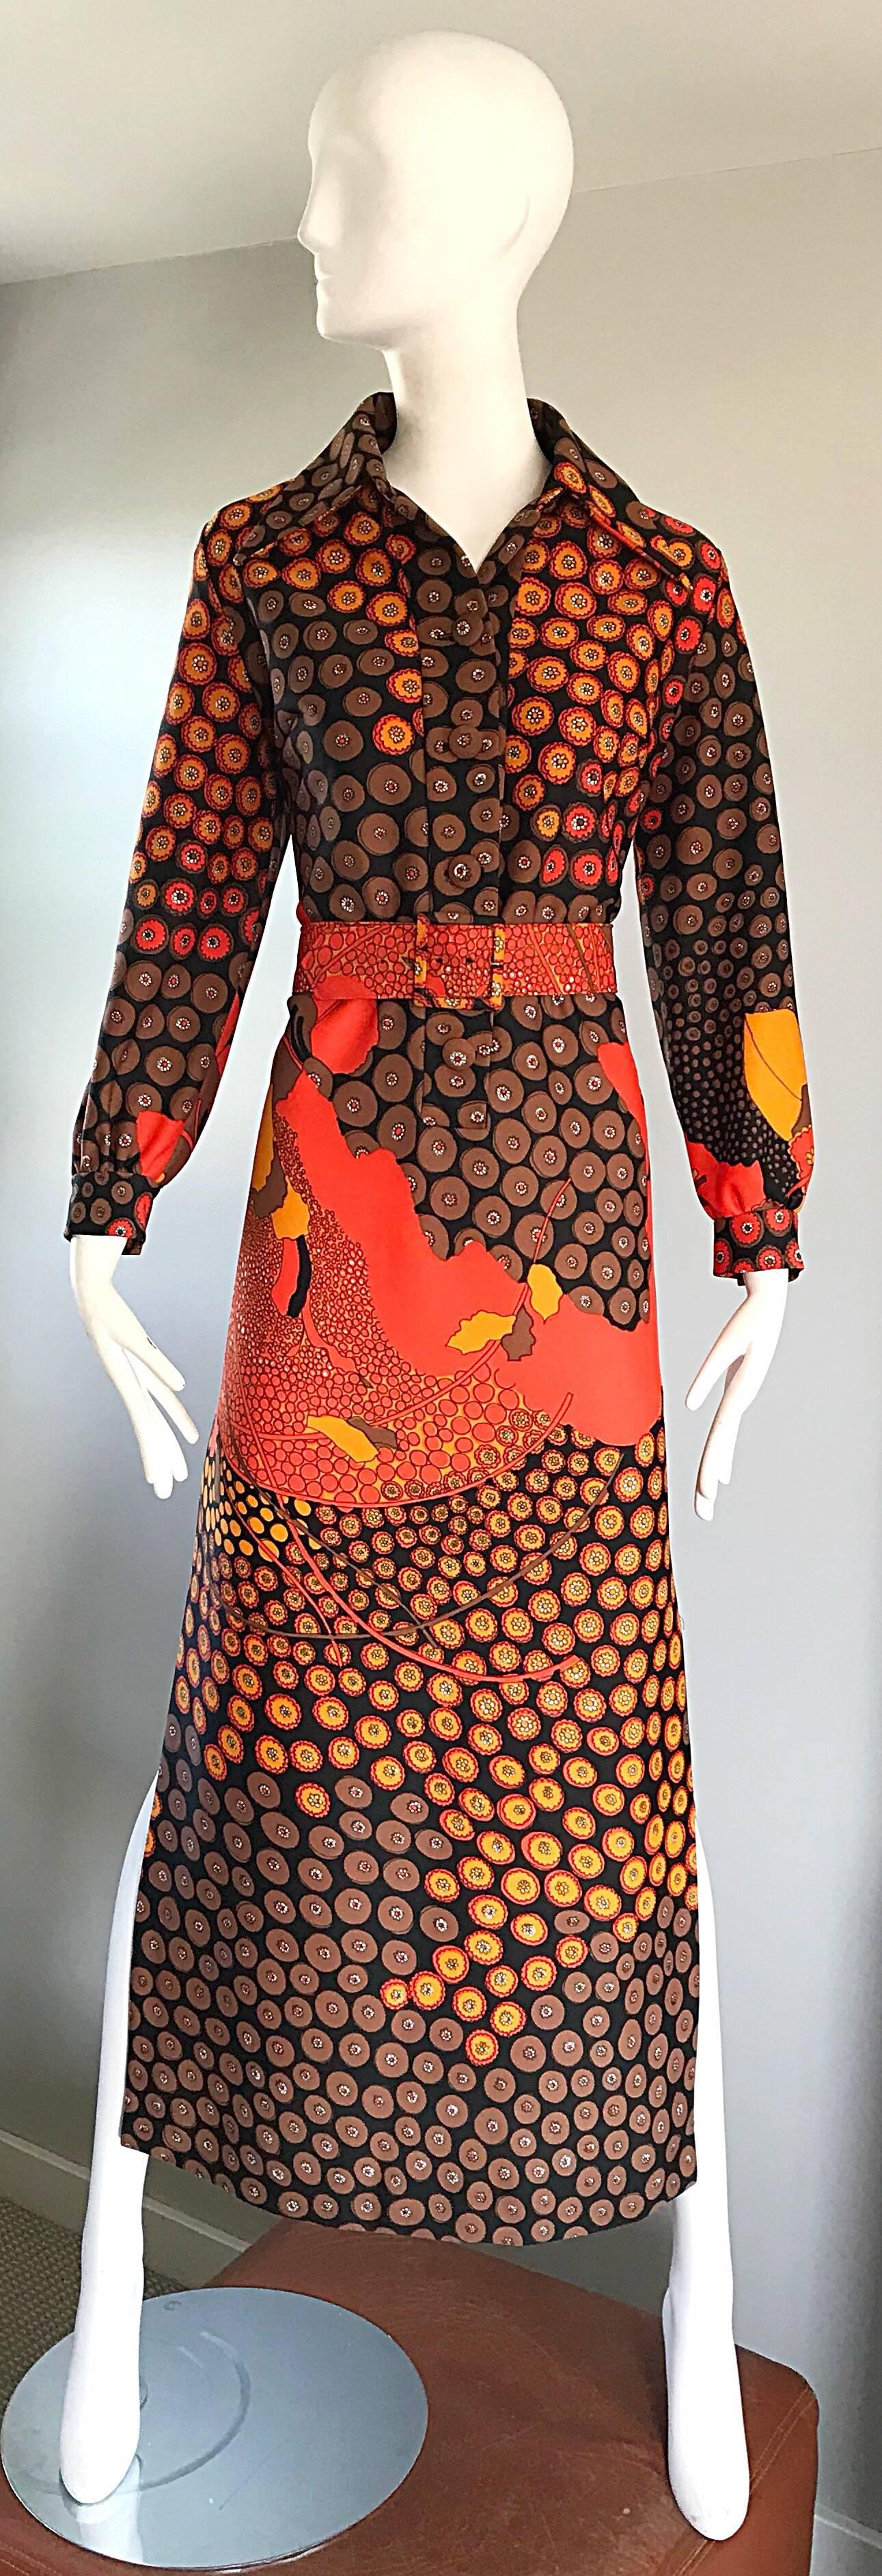 Amazing 1970s ROOS ATKINS abstract belted boho knit maxi dress! Features vibrant hues of orange, yellow, brown and black throughout. Wonderful tailored bodice features fabric covered buttons up the front. Long sleeves also feature buttons at each